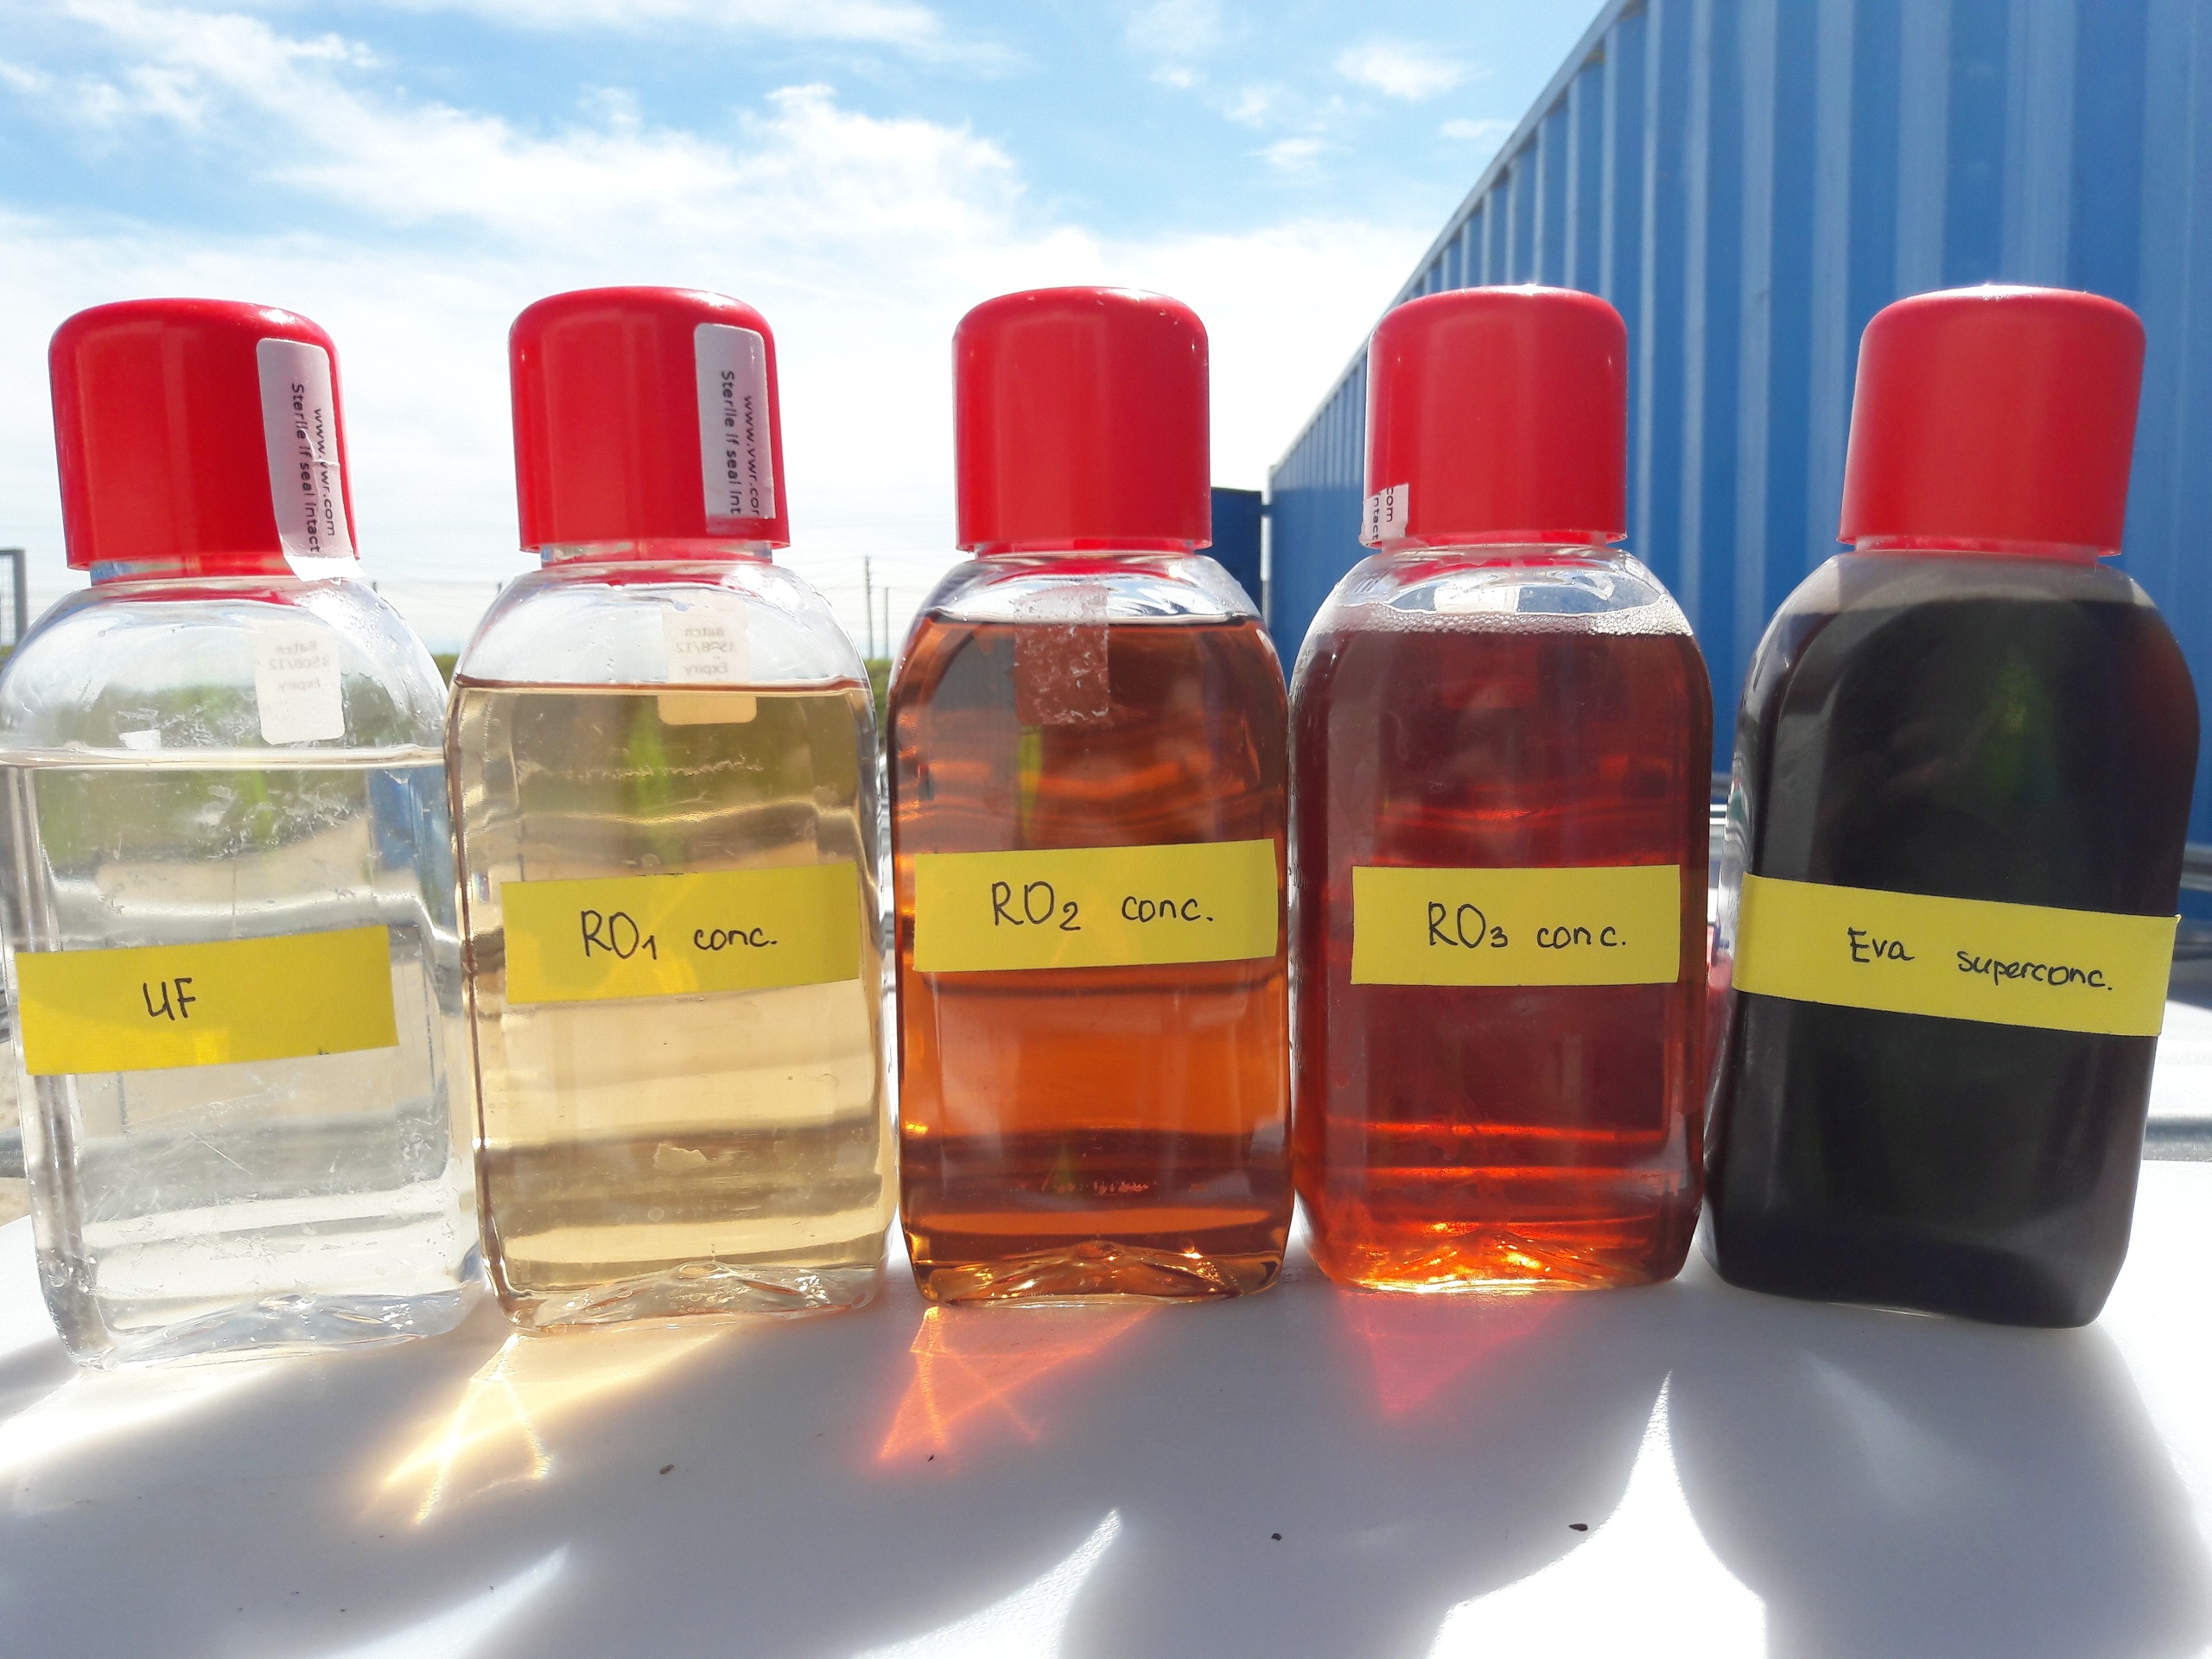  Concentrates from the respective process stages, from UF permeate (left) to evaporator concentrate (right).